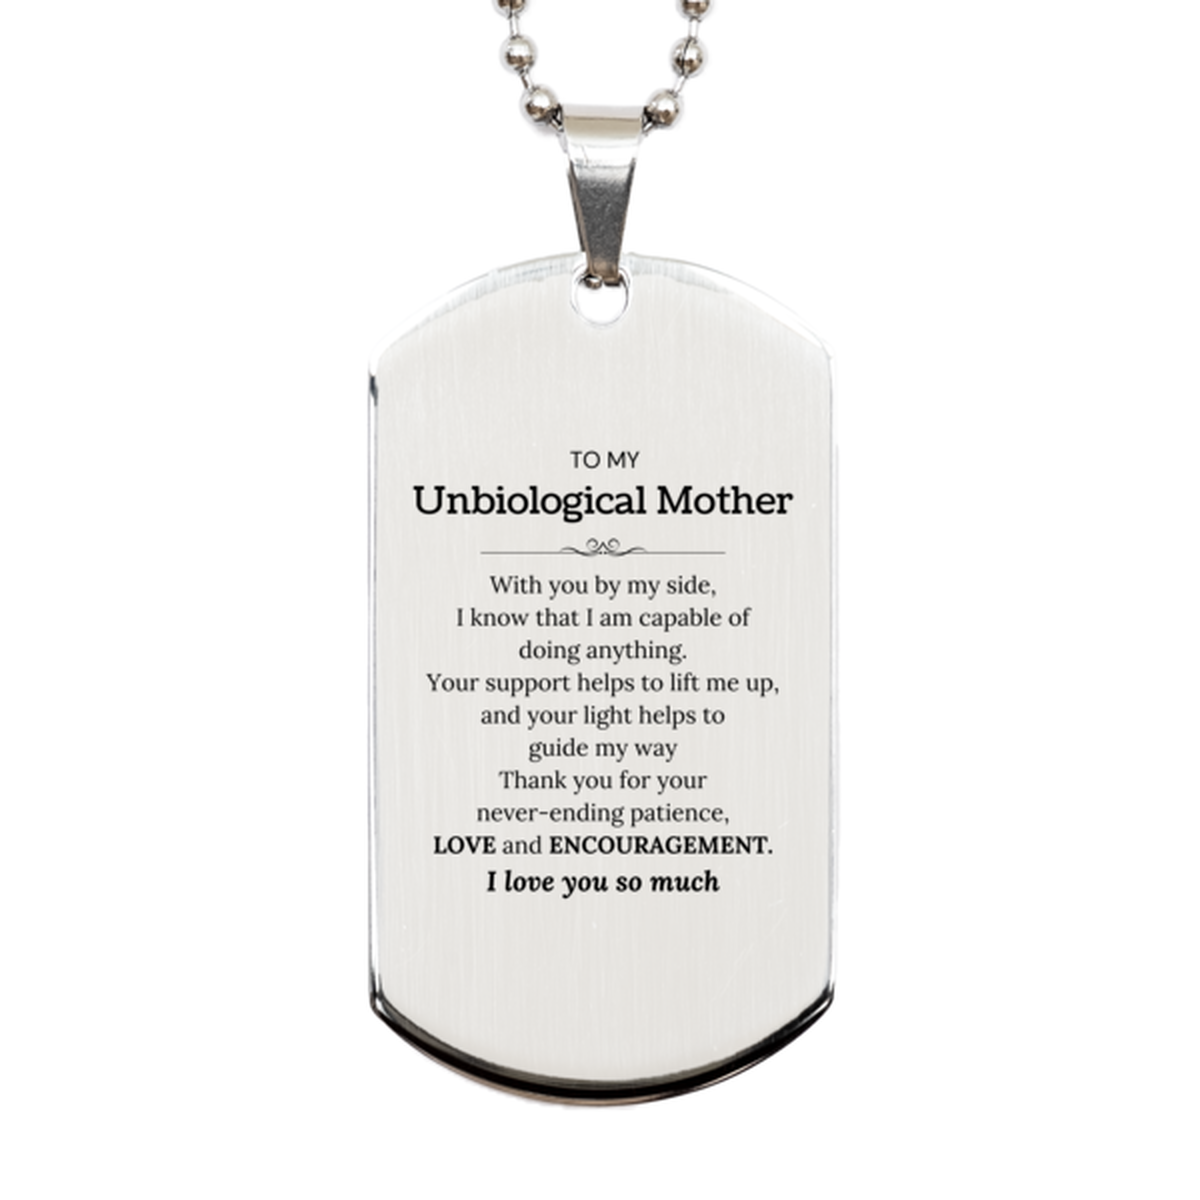 Appreciation Unbiological Mother Silver Dog Tag Gifts, To My Unbiological Mother Birthday Christmas Wedding Keepsake Gifts for Unbiological Mother With you by my side, I know that I am capable of doing anything. I love you so much